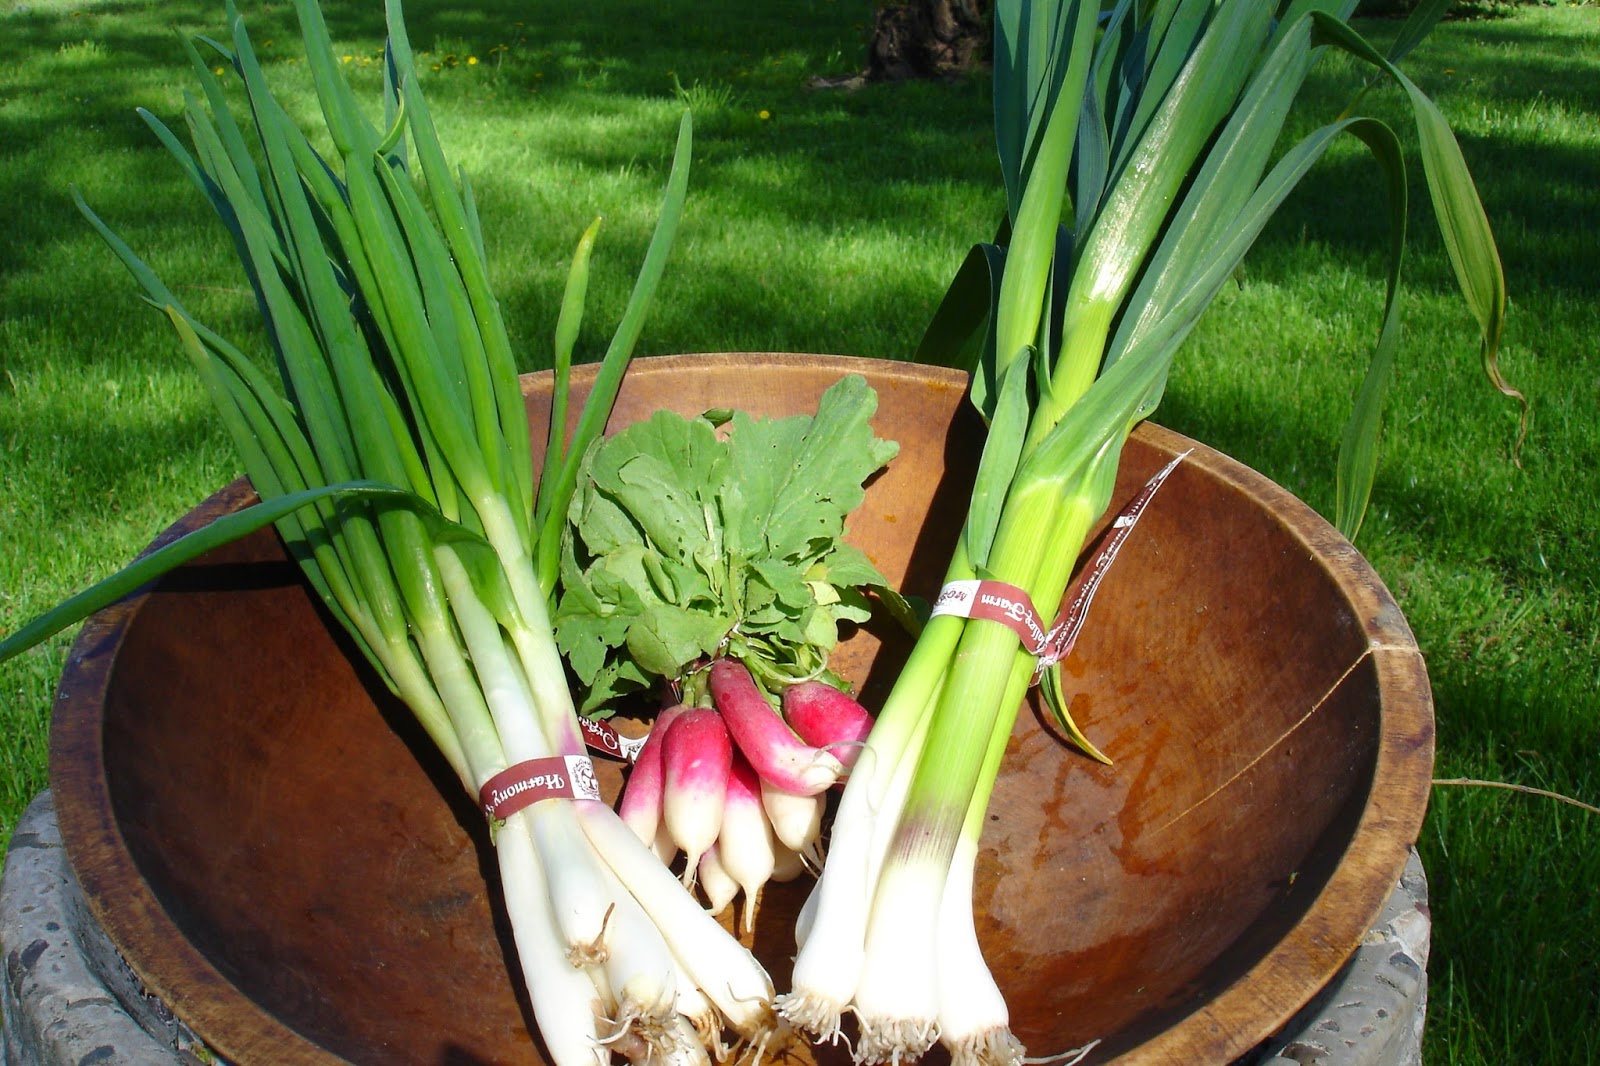 Harmony Valley Farm Vegetable Feature Onions